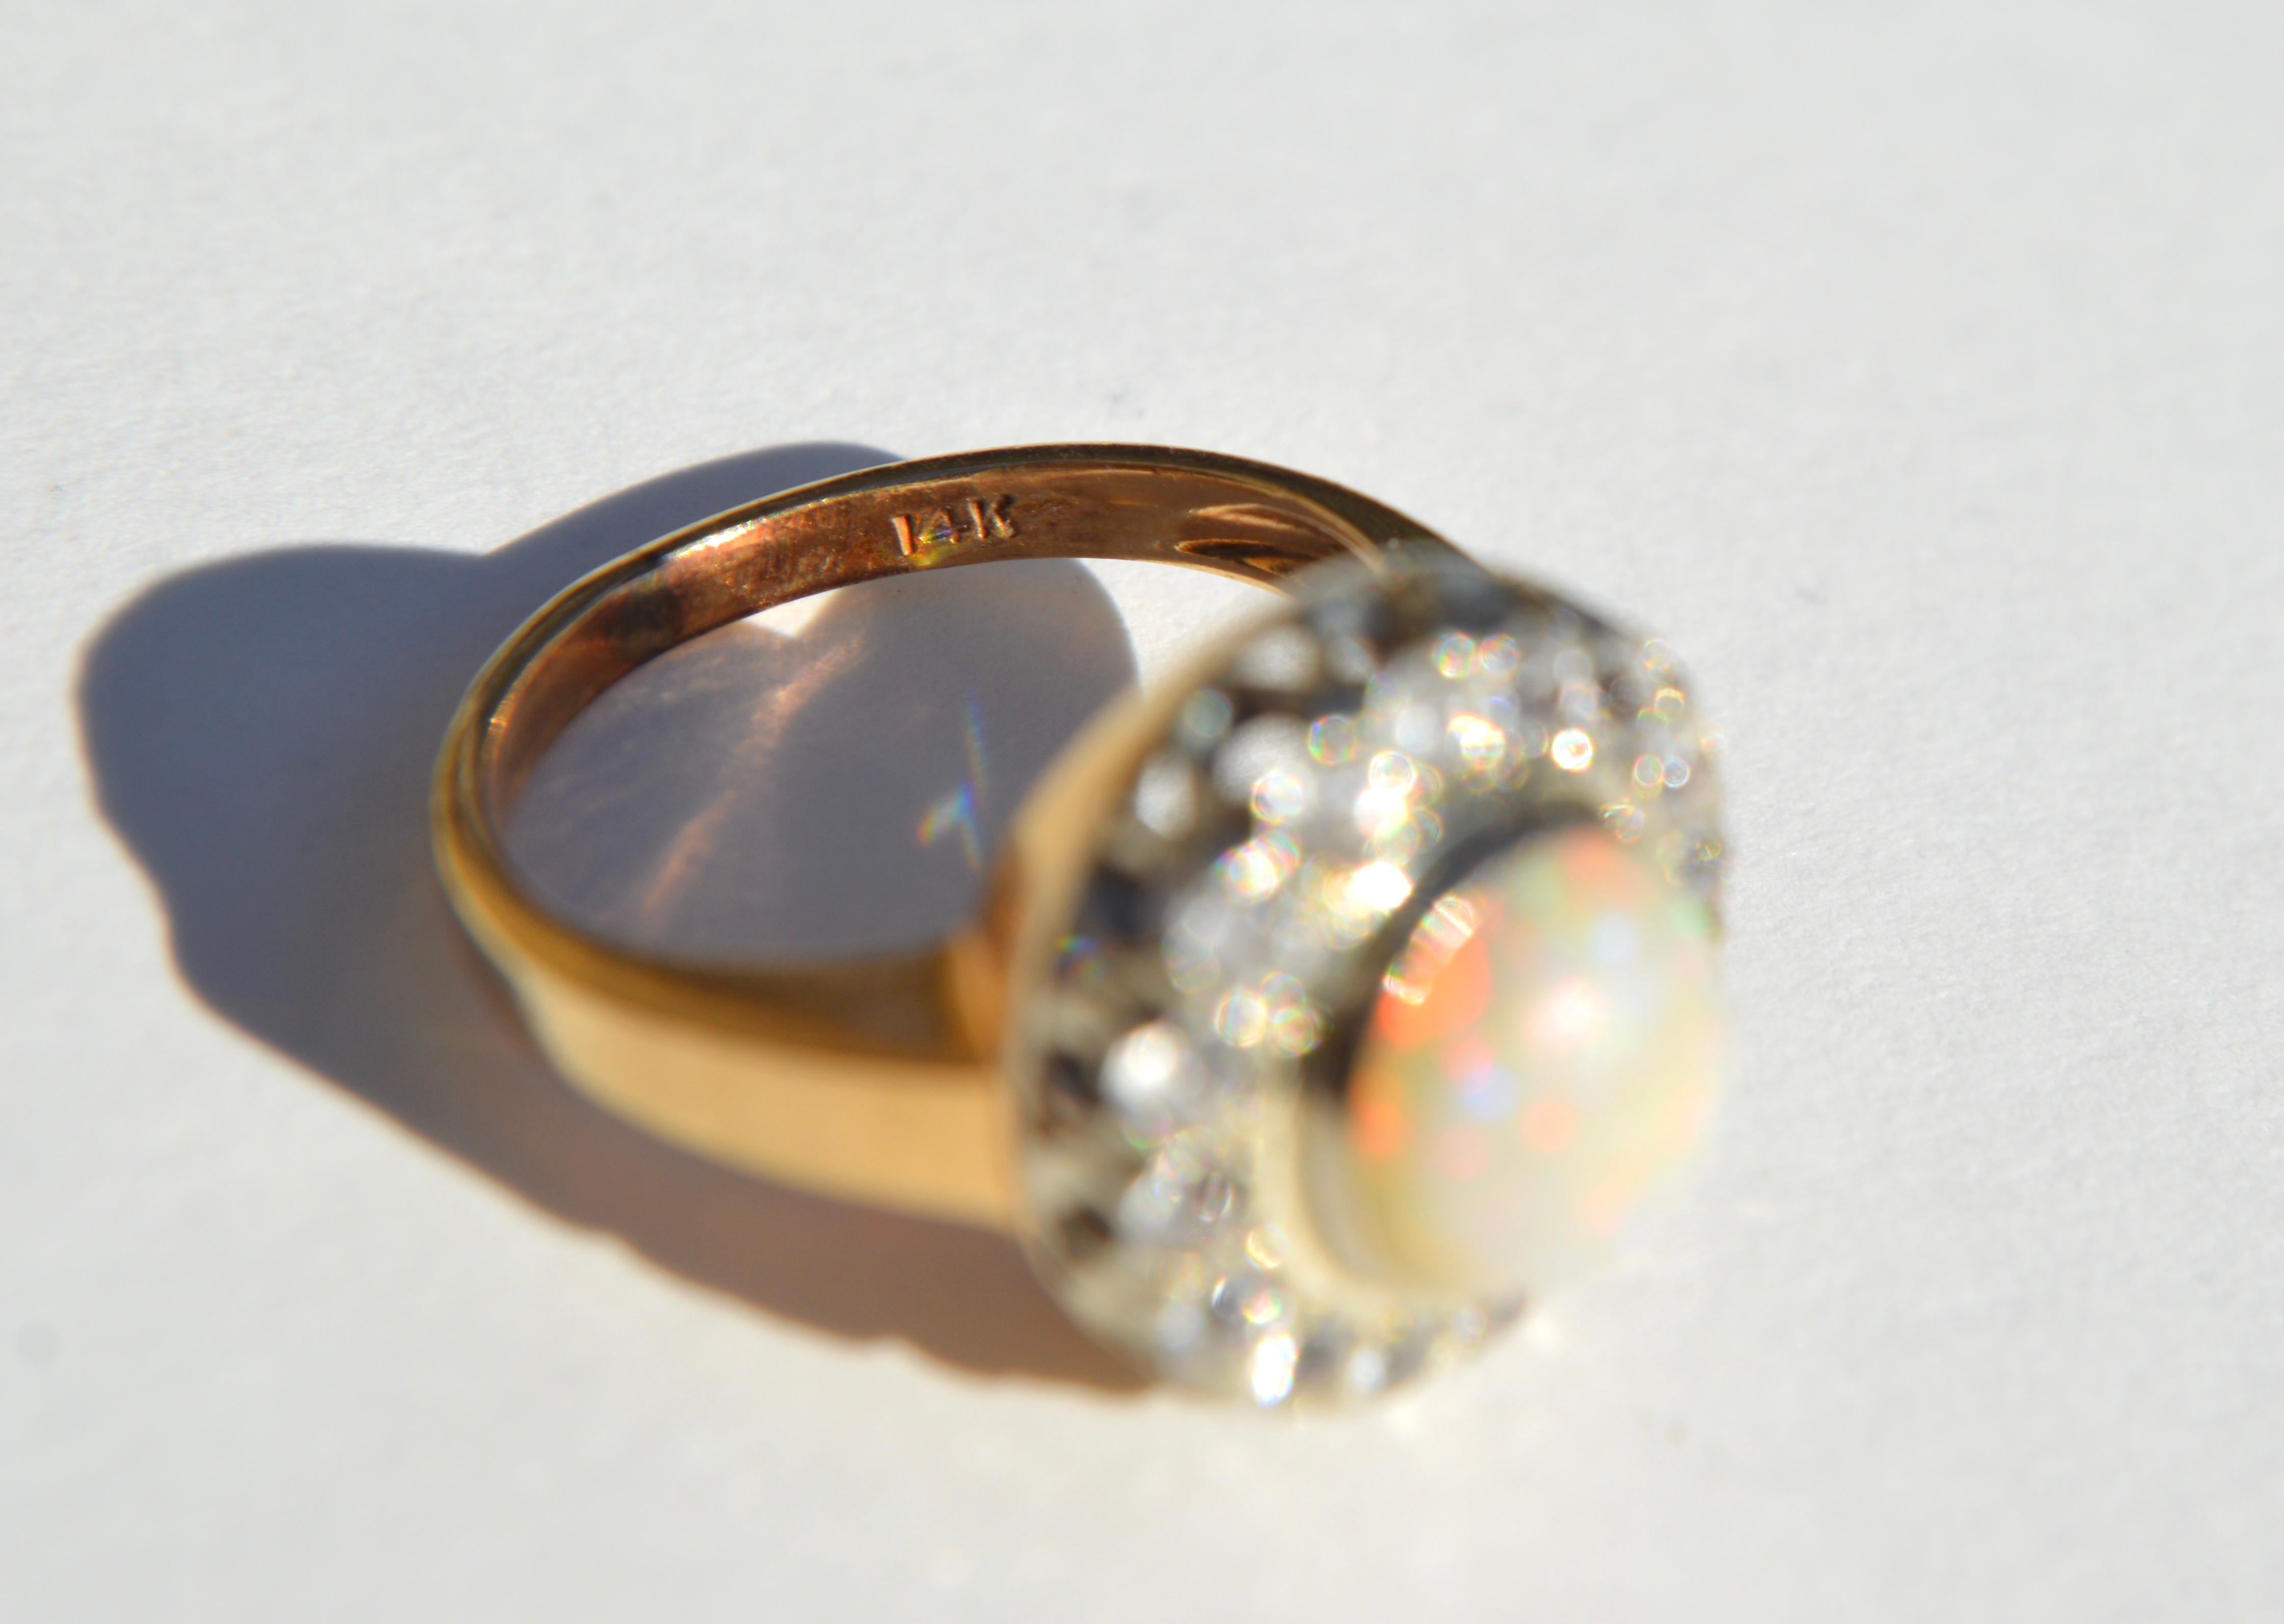 Vintage Retro 1940s 2.04 Carat Opal Diamond 14 Karat Gold Halo Engagement Ring In Good Condition For Sale In Crownsville, MD